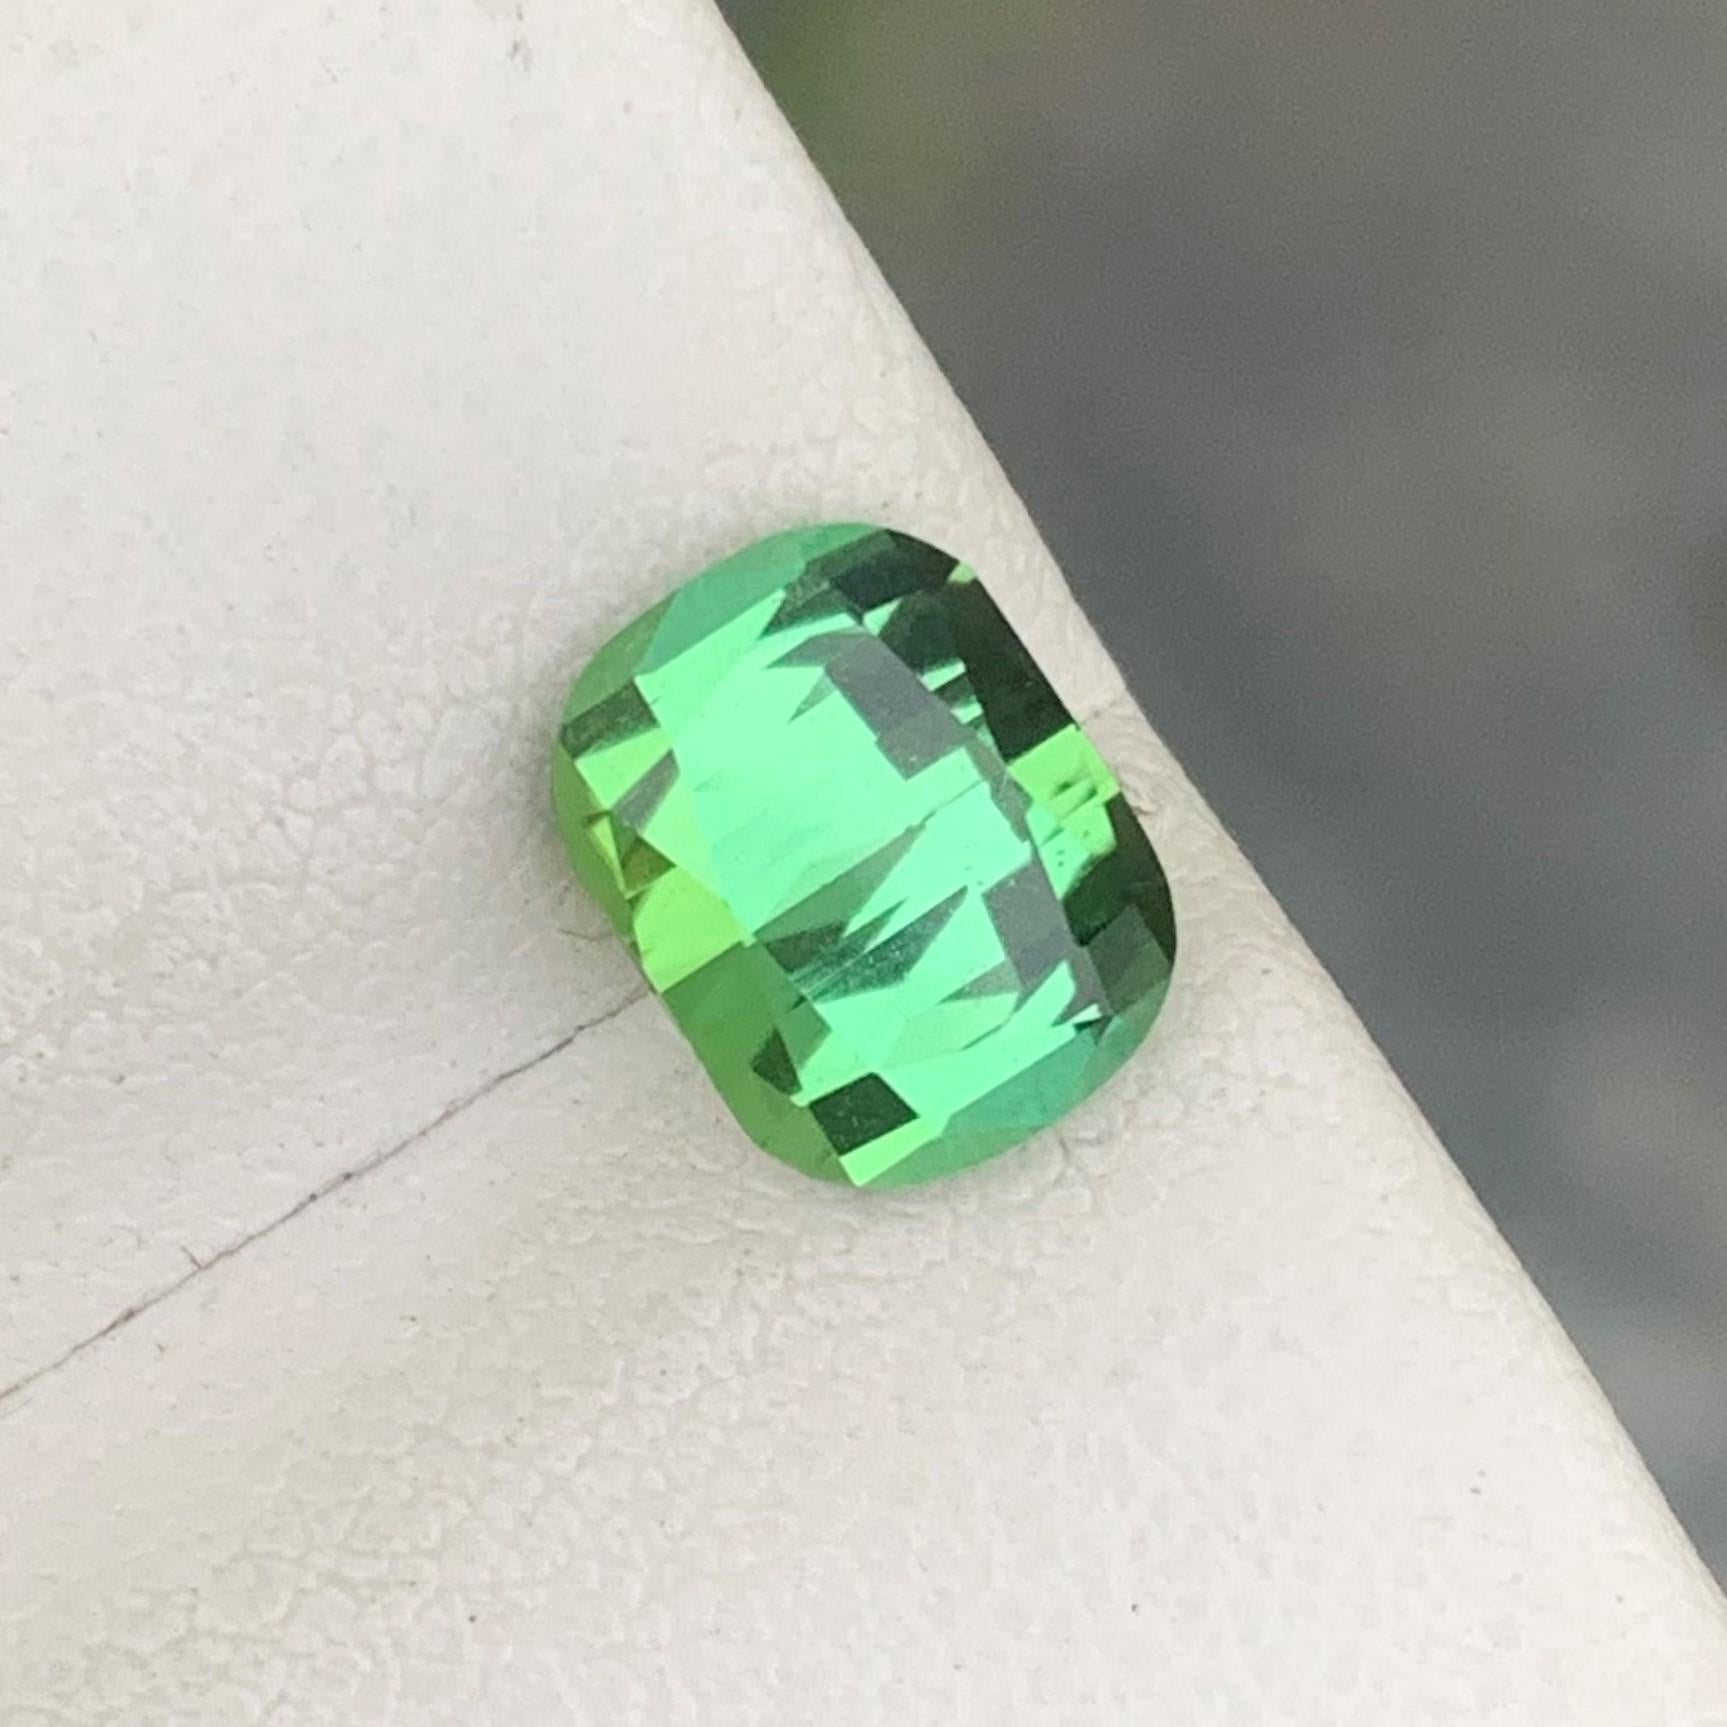 Gemstone Type : Tourmaline
Weight : 2.10 Carats
Dimensions : 8.1x6.3x5.1 Mm
Origin : Kunar Afghanistan
Clarity : Eye Clean
Shape: Cushion
Color: Green
Certificate: On Demand
Basically, mint tourmalines are tourmalines with pastel hues of light green